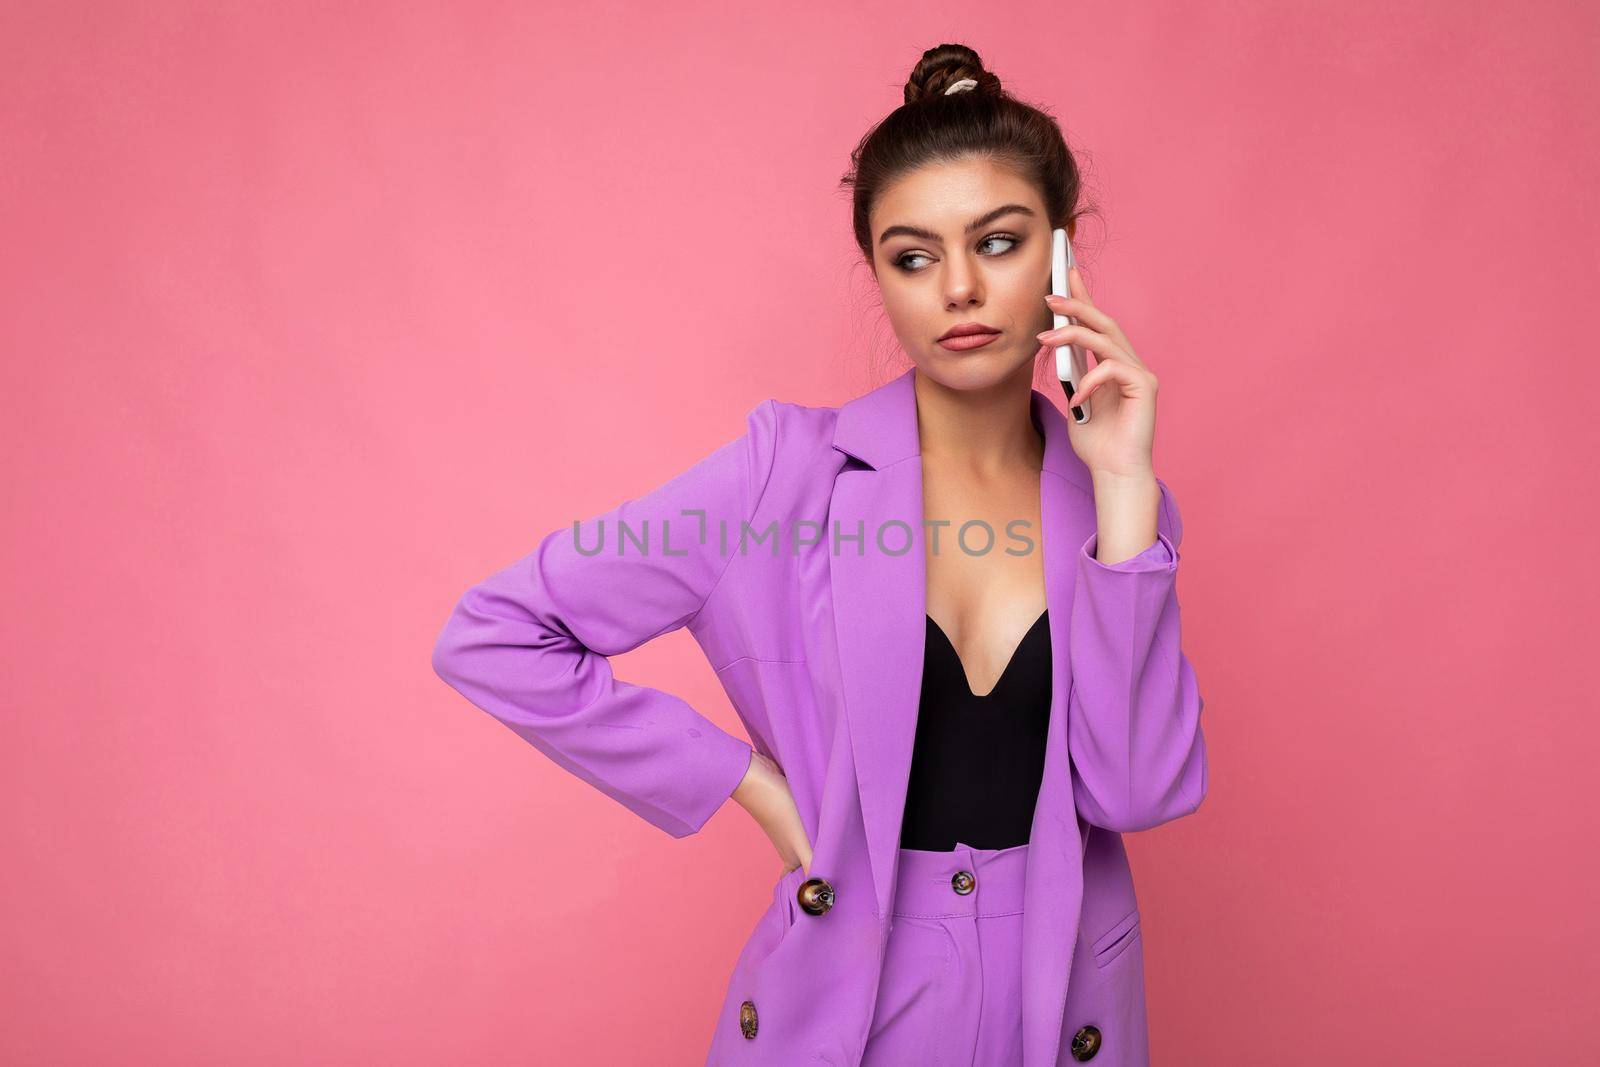 Photo of dissatisfied beautiful young woman wearing purple suit talking on the mobile phone isolated over pink background looking to the side.